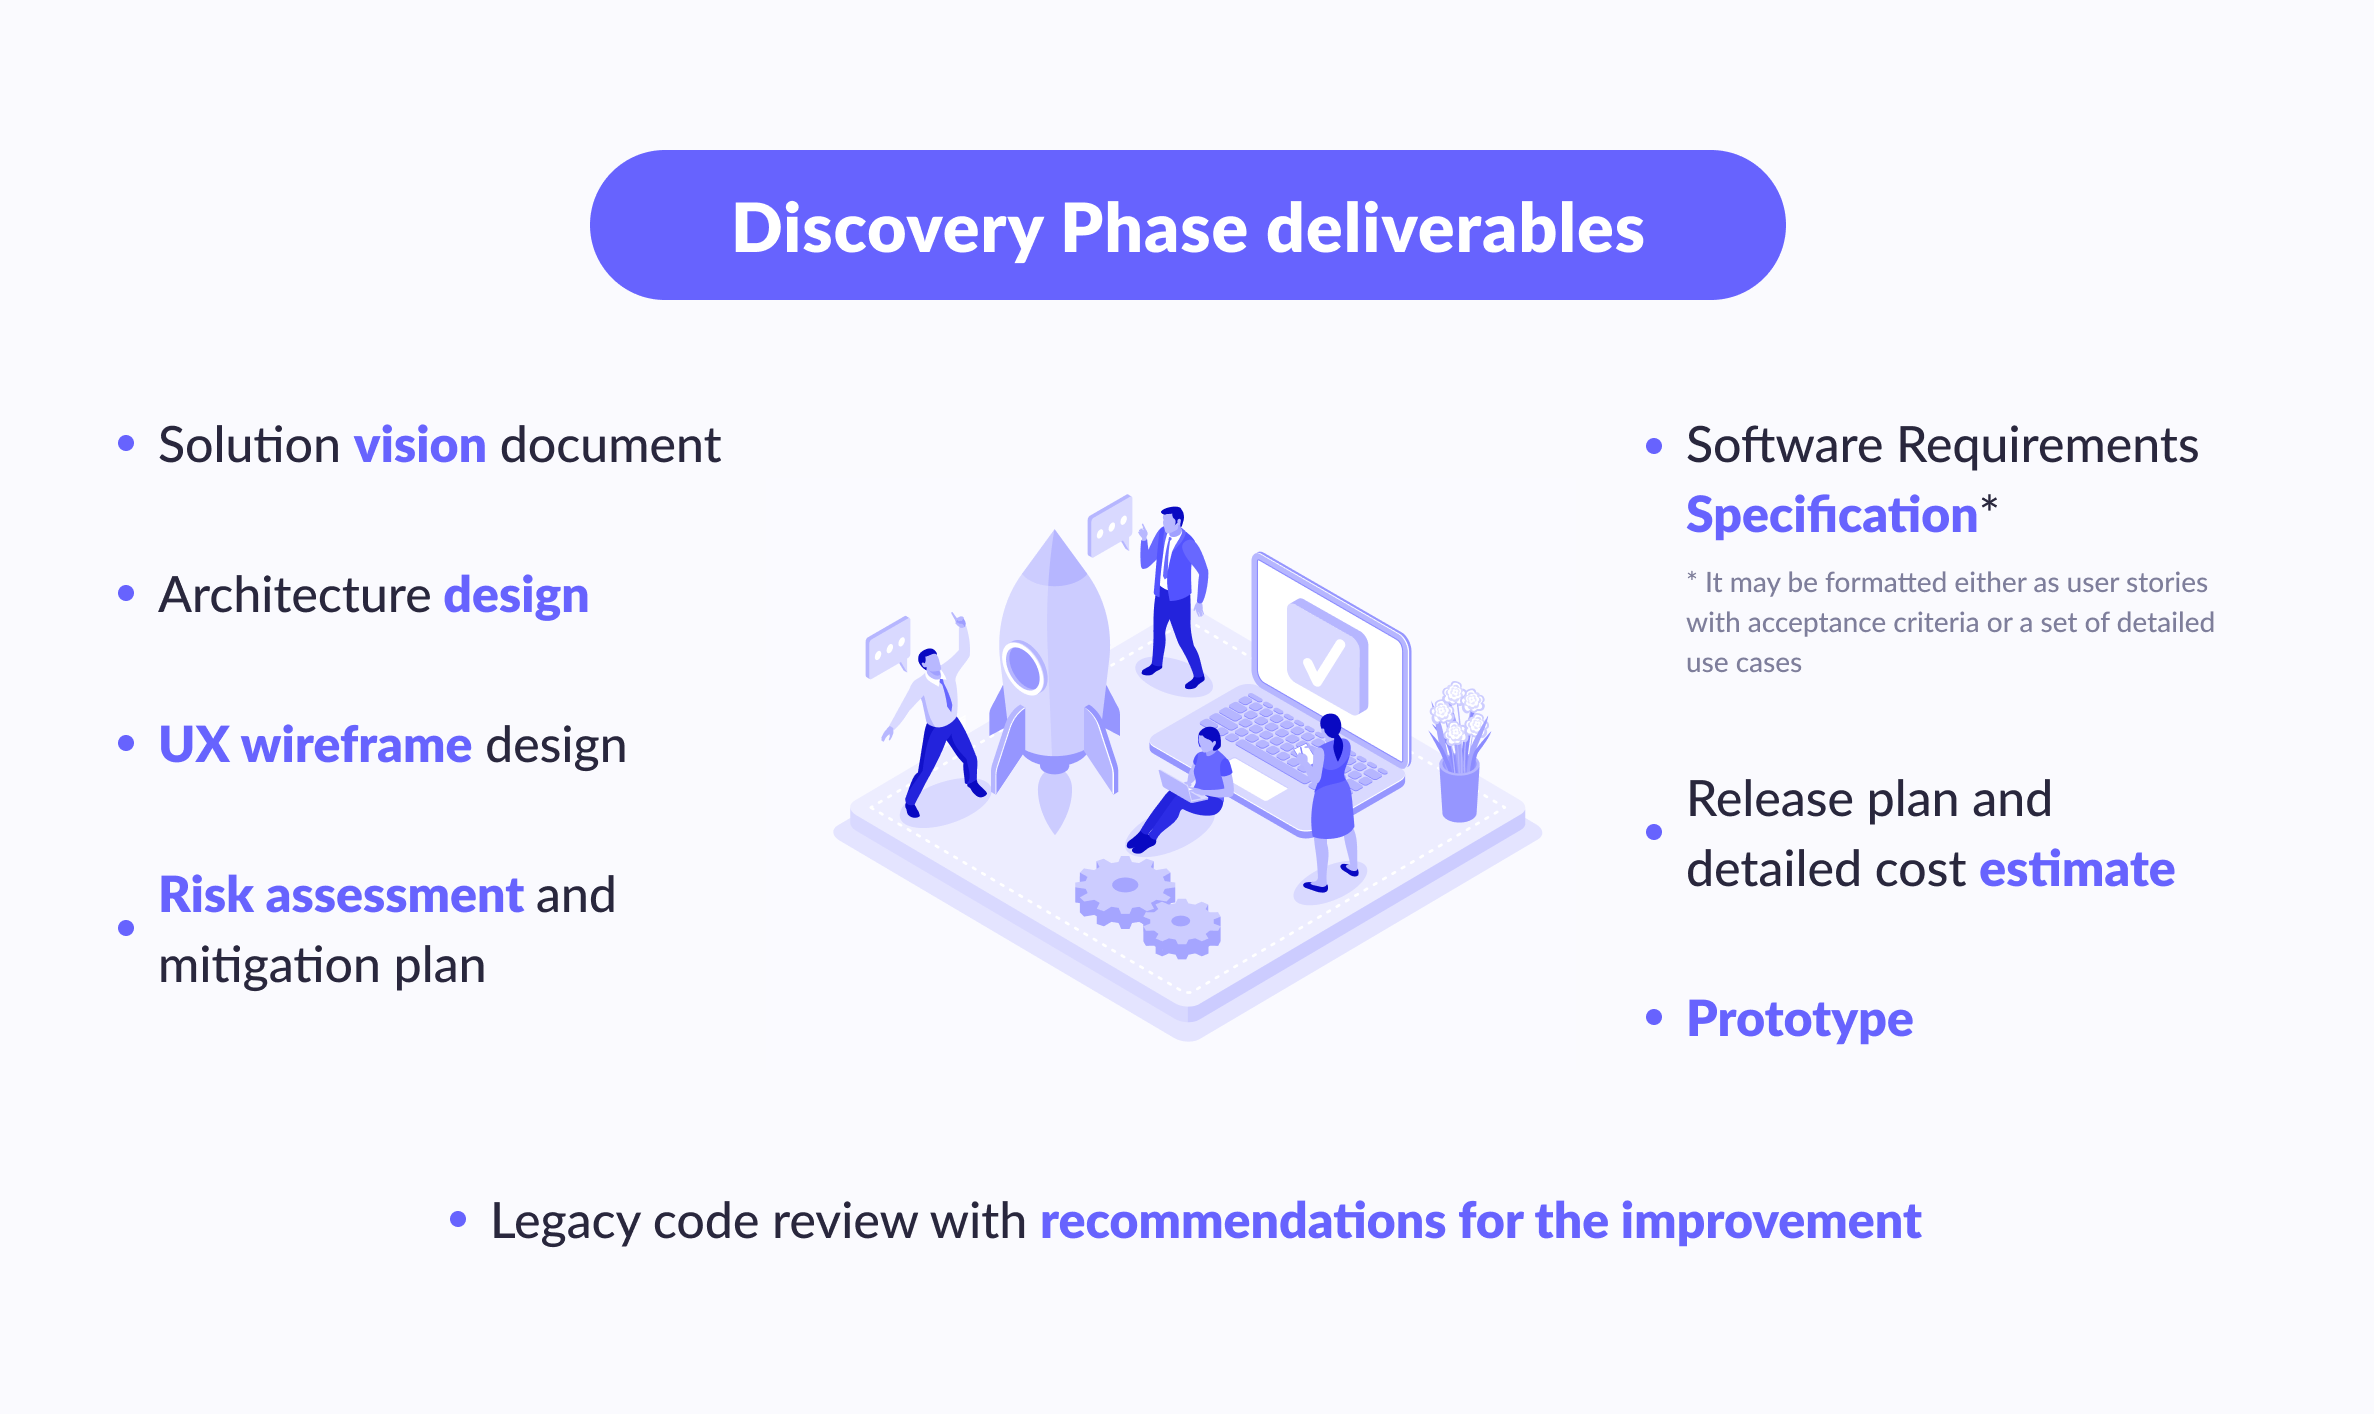 Discovery Phase deliverables